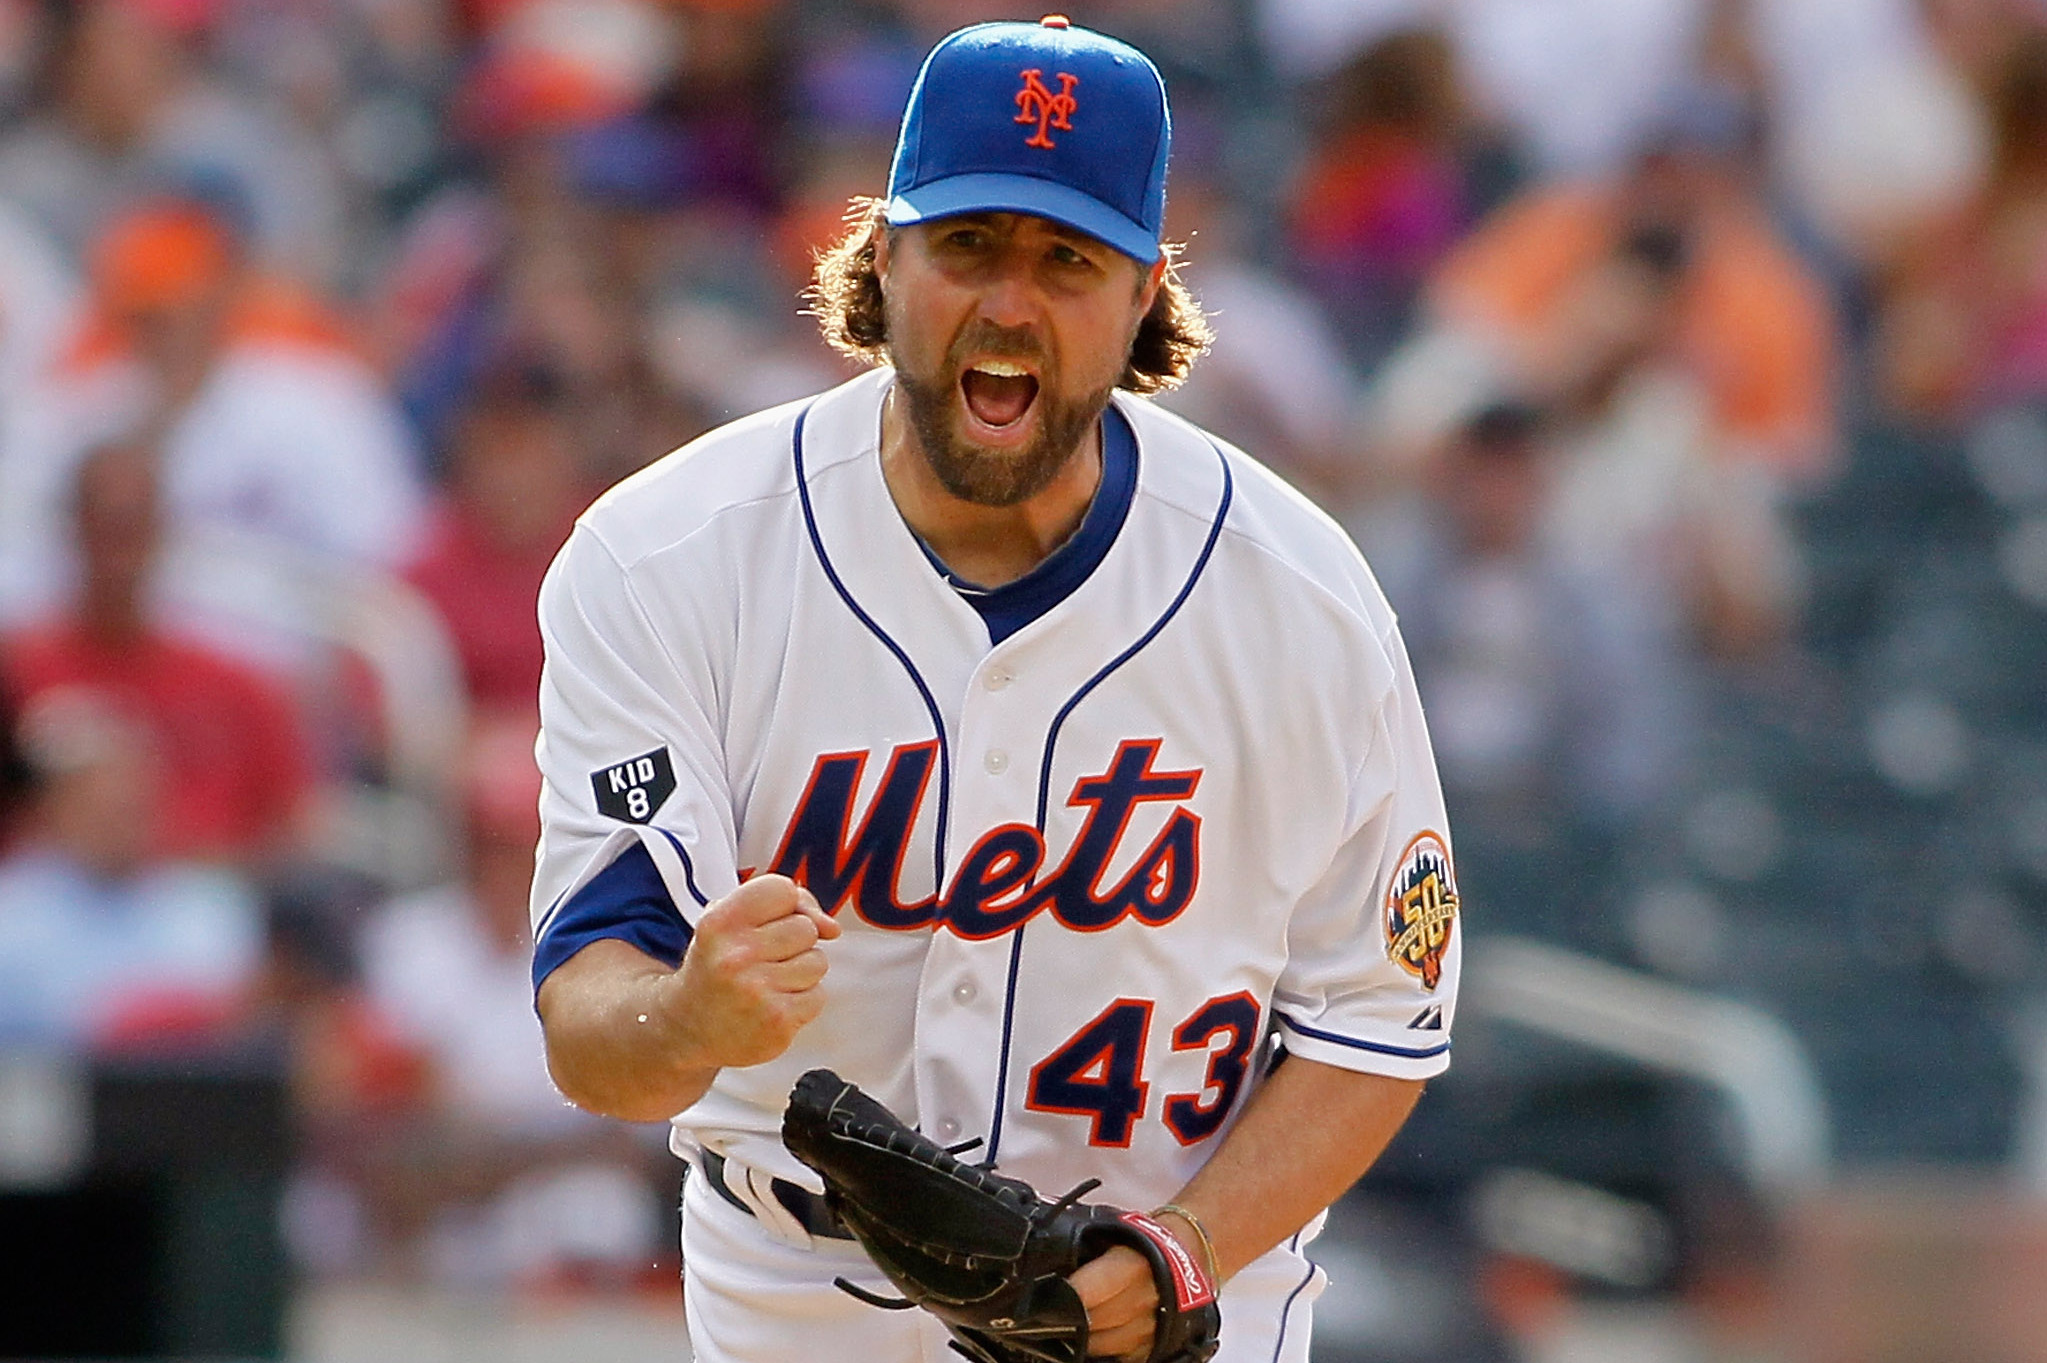 New York Mets vs Detroit Tigers. Mets pitcher R.A. Dickey wife